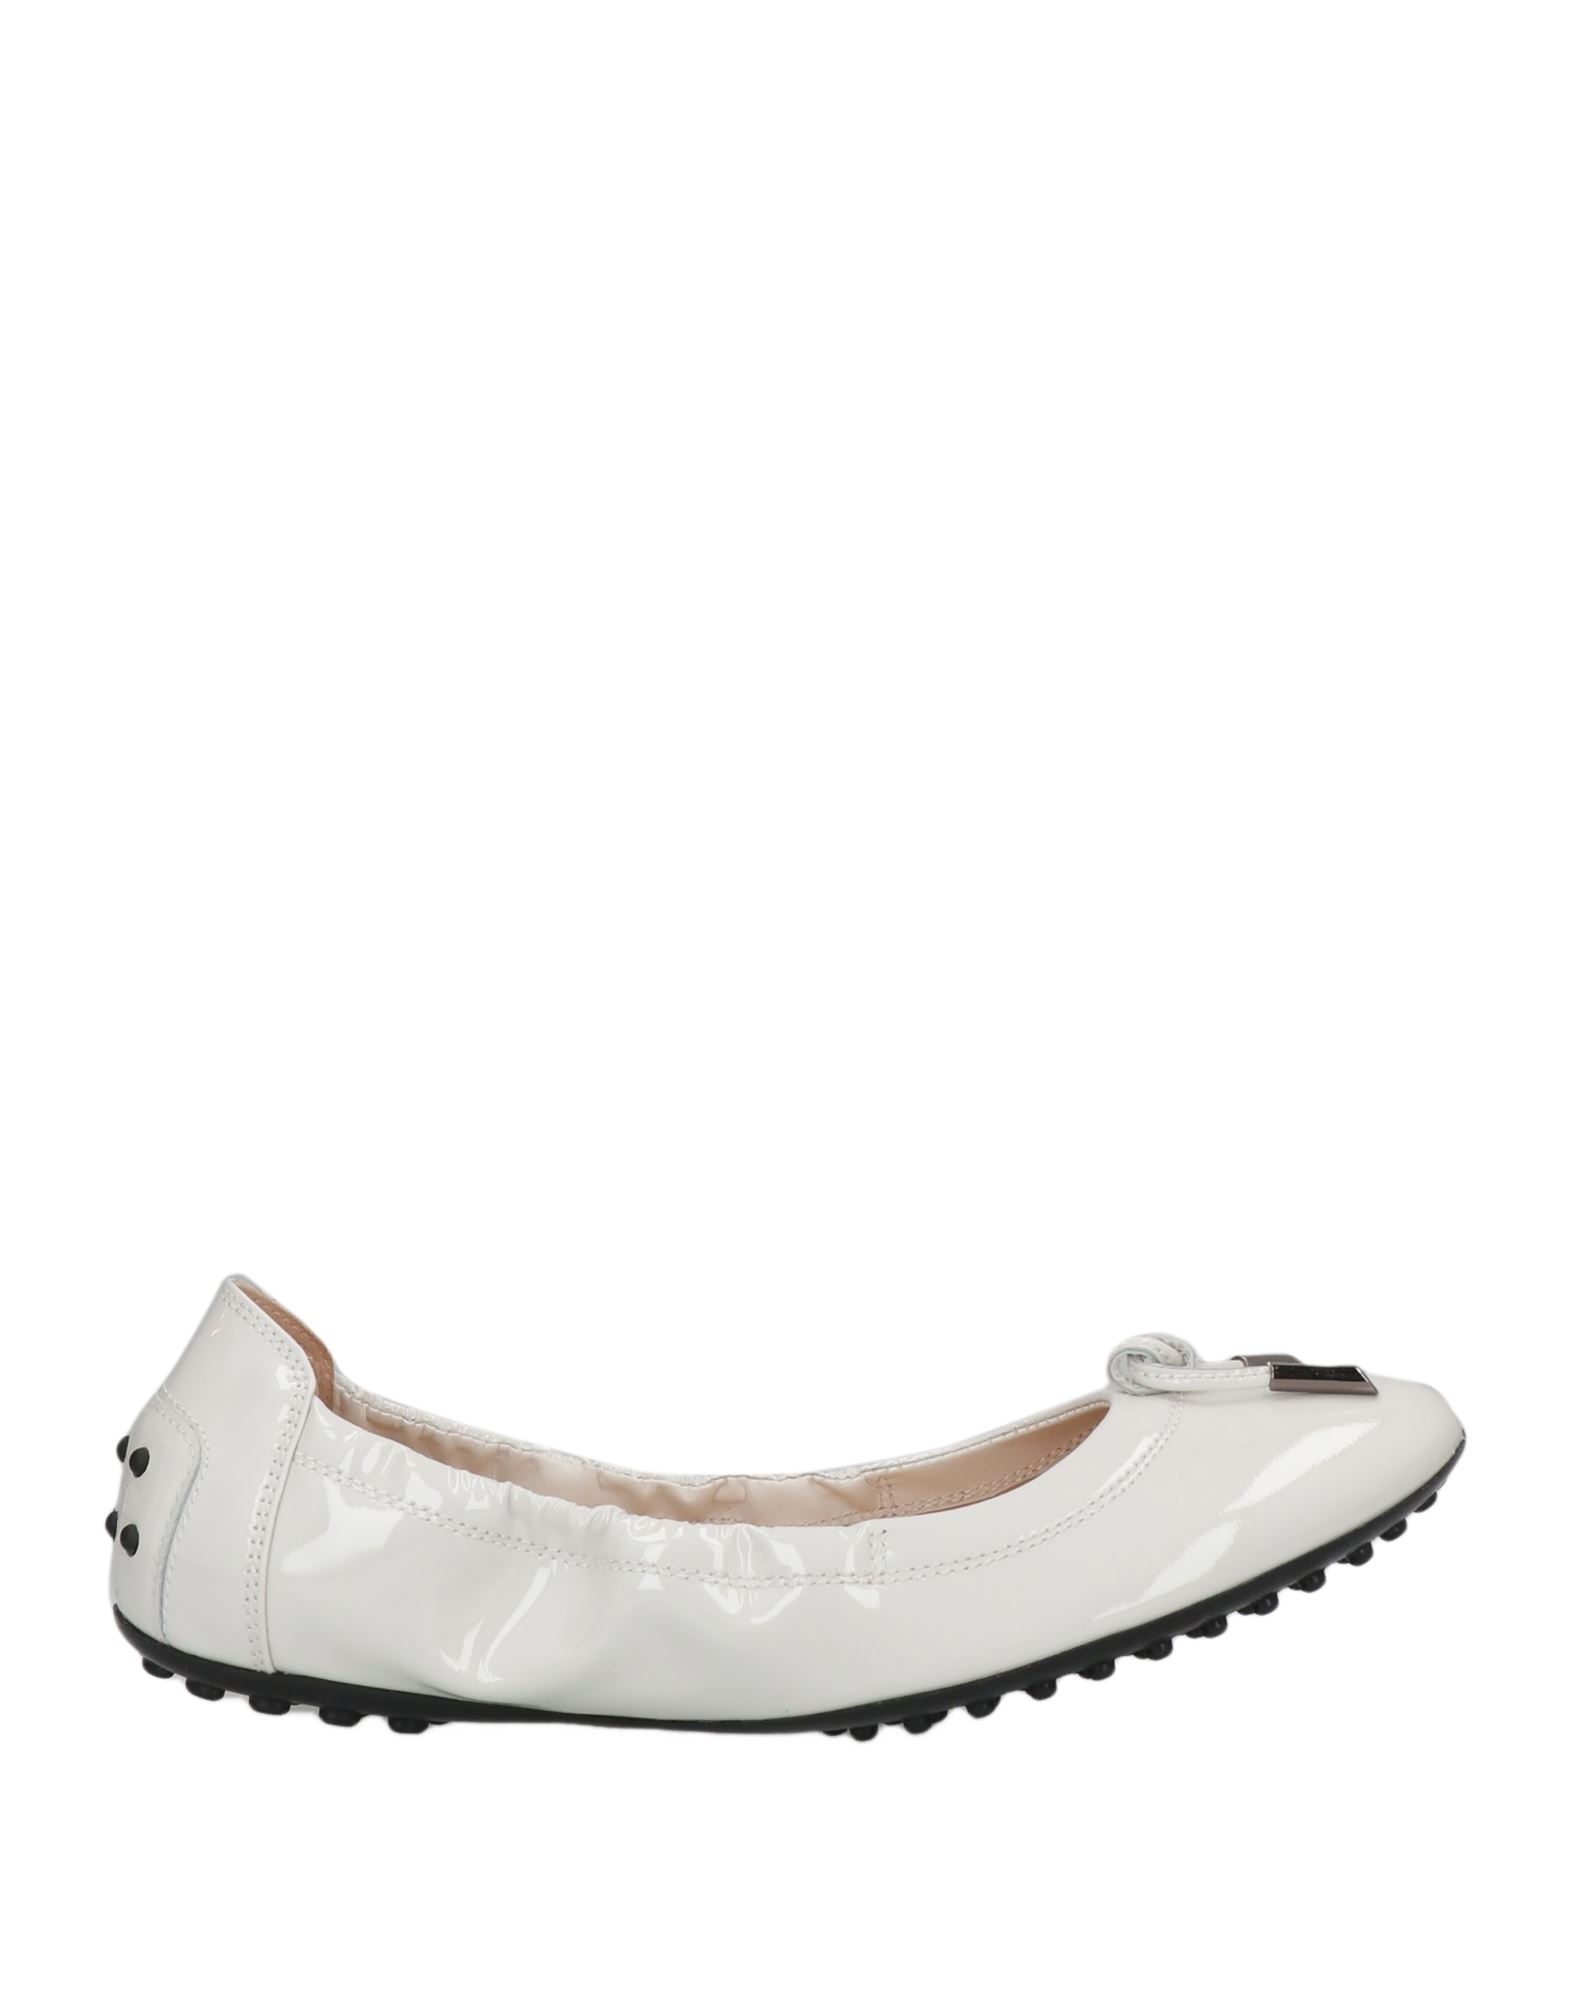 TOD'S TOD'S WOMAN BALLET FLATS WHITE SIZE 8 SOFT LEATHER